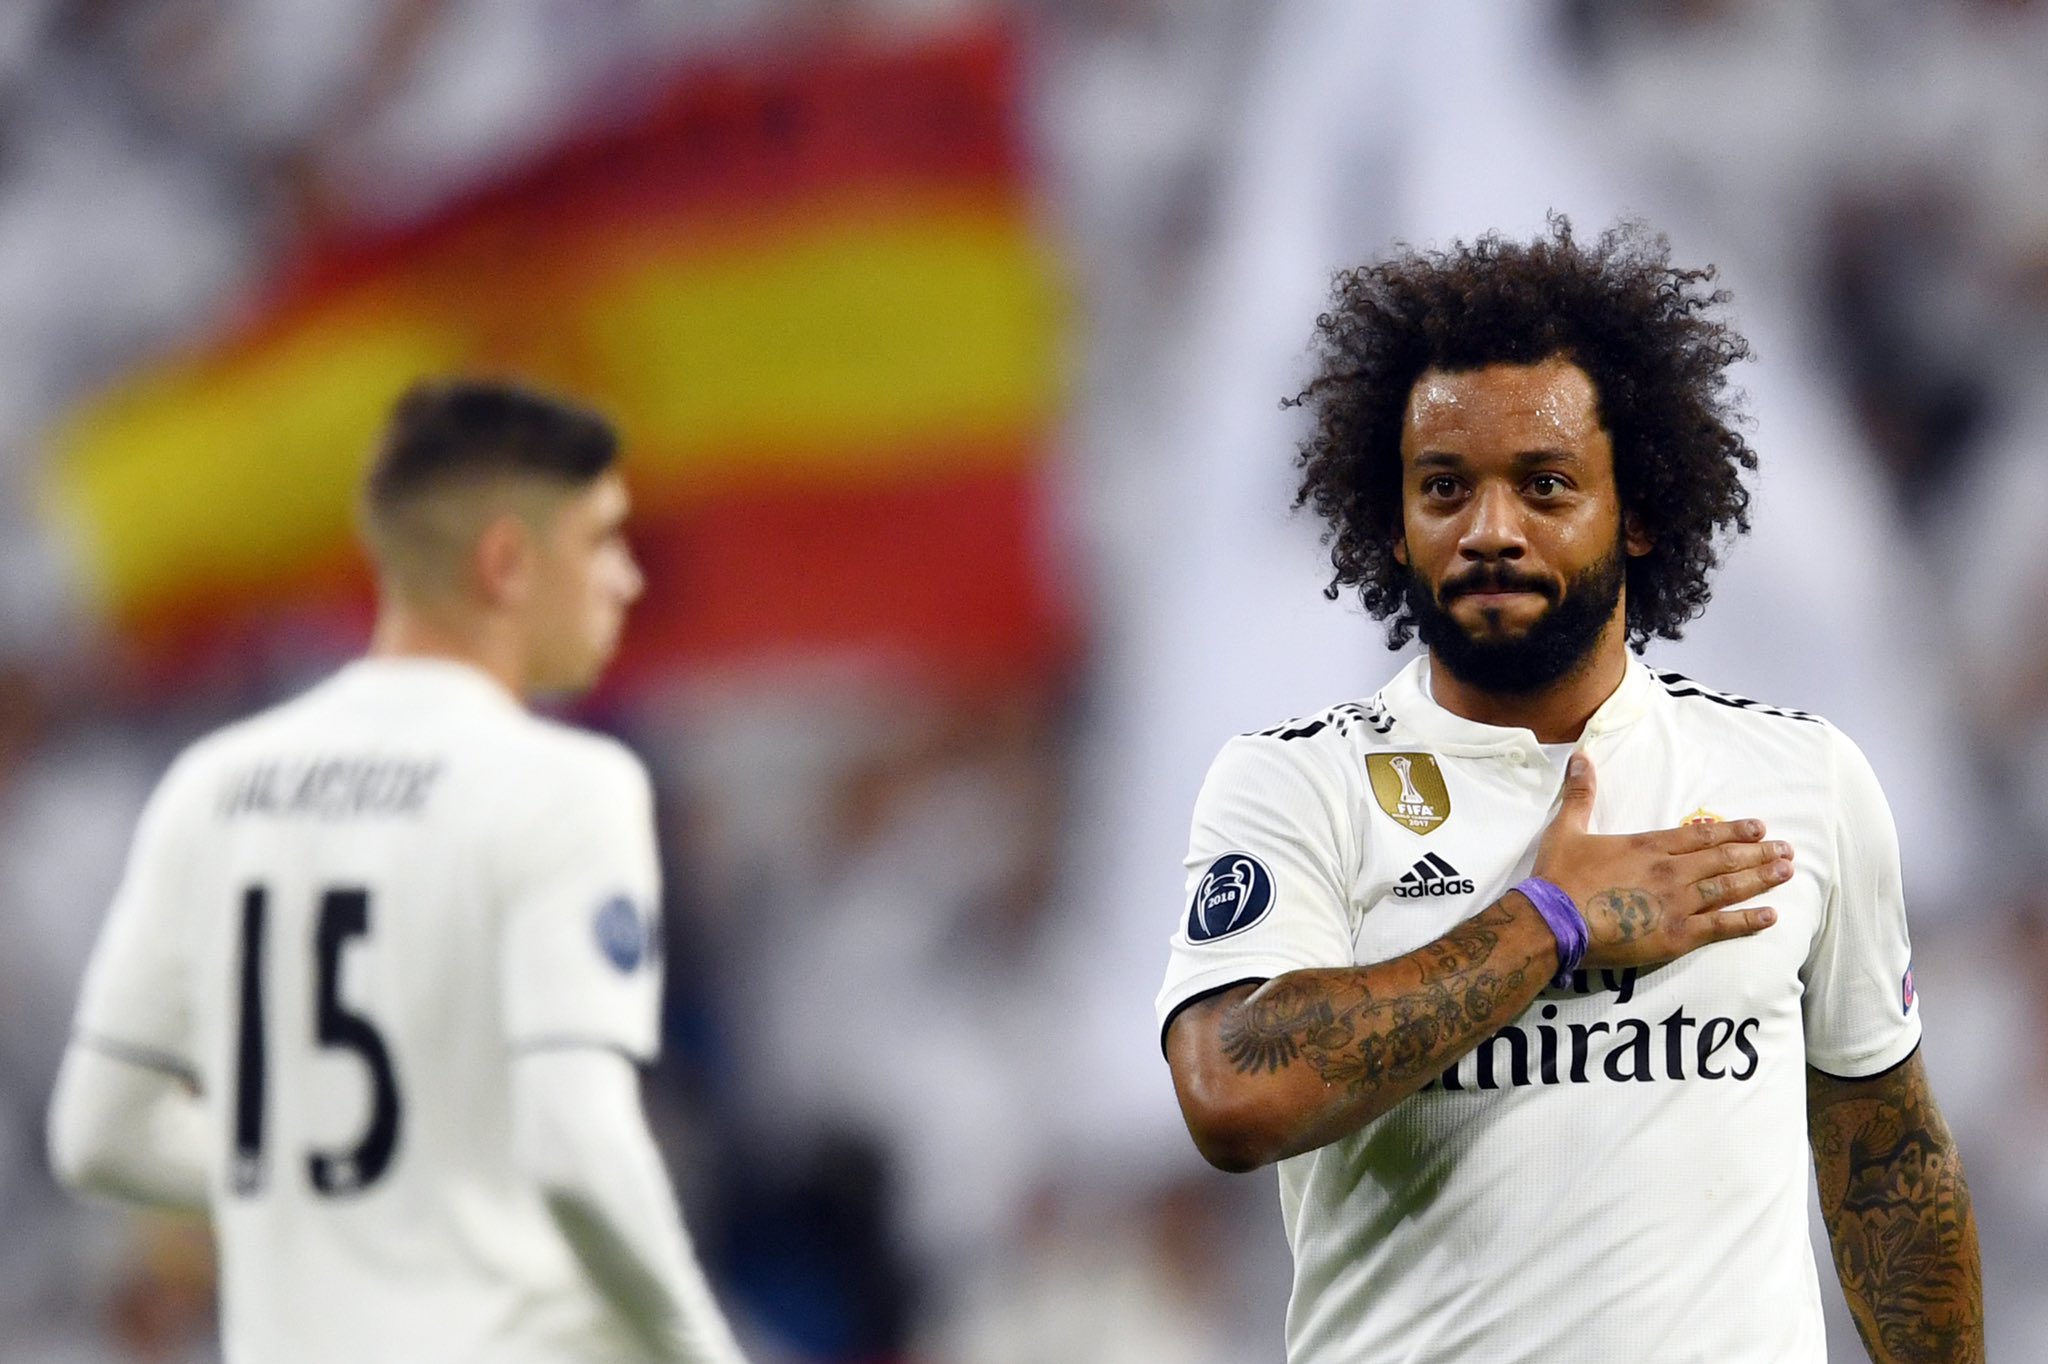 Reports | Fenerbahce set to sign Marcelo on free transfer after Real Madrid exit